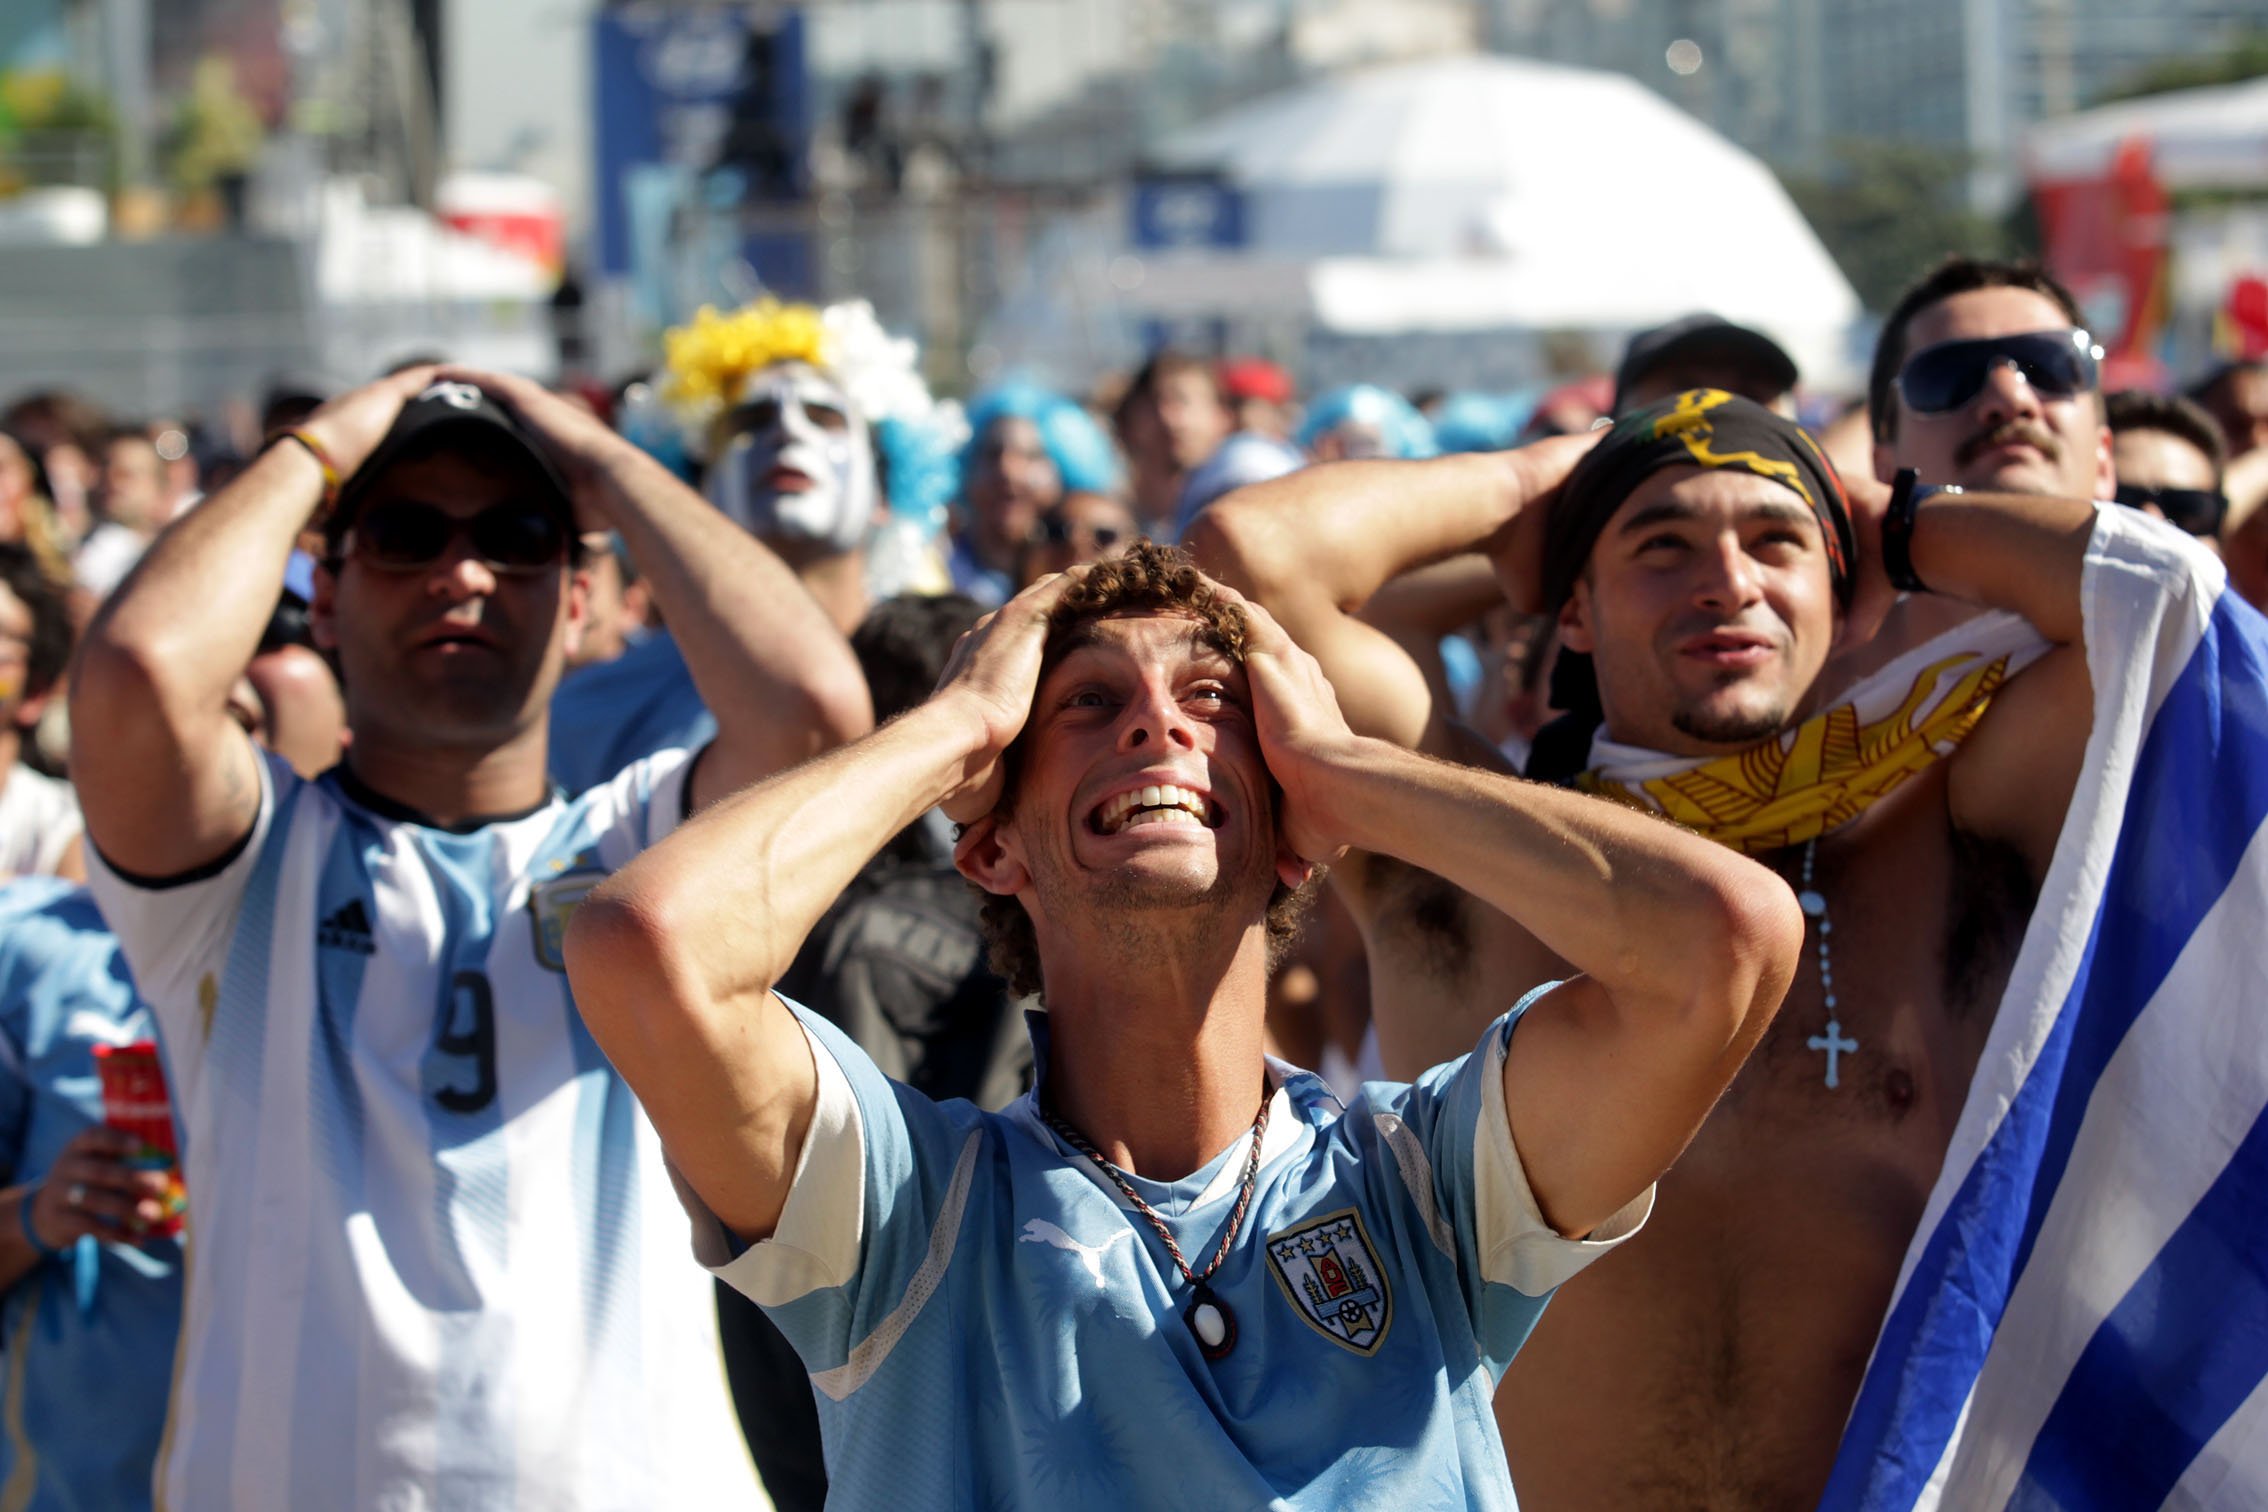 Supporters of Italy and Uruguay watch the match on the big screens of FIFA Fan Fest on the sands of Copacabana beach, Rio de Janeiro on June 24, 2014.